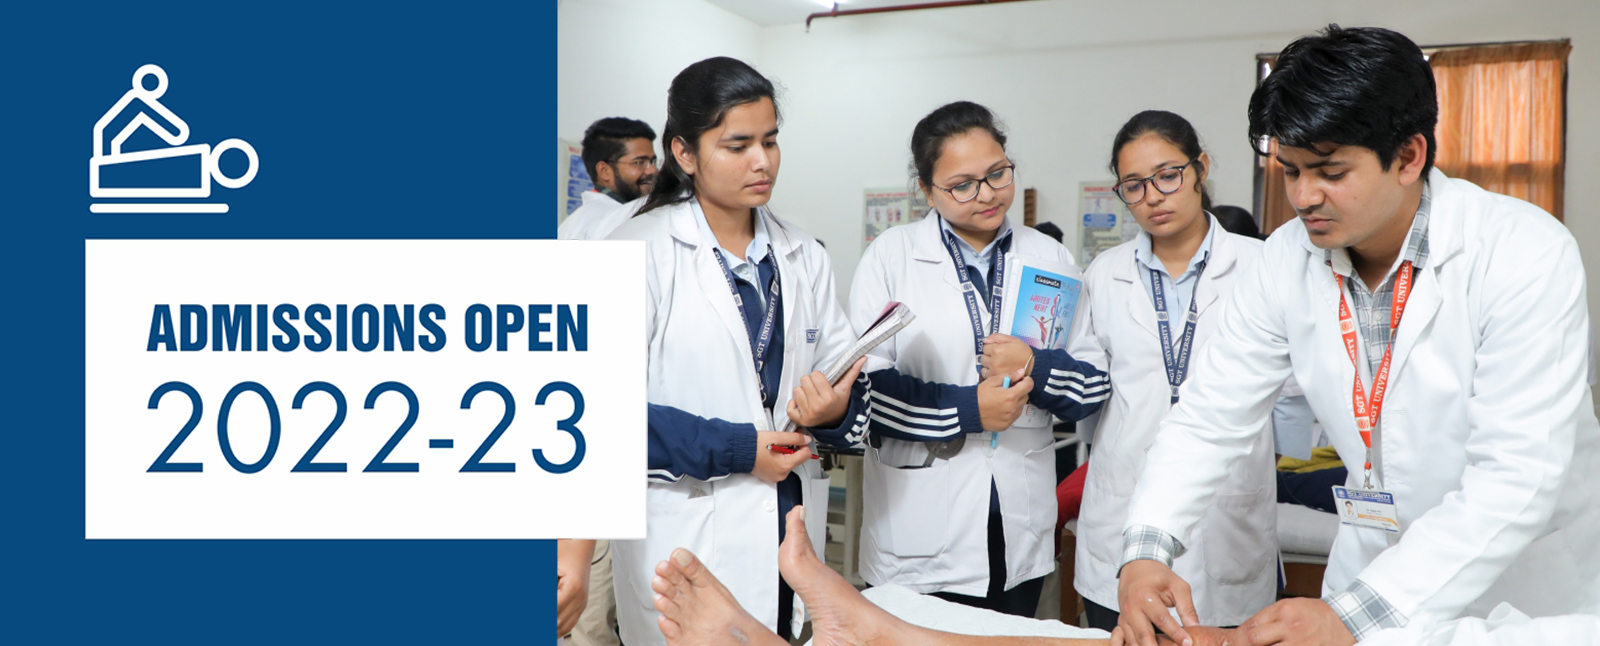 Admissions Open Physiotherapy